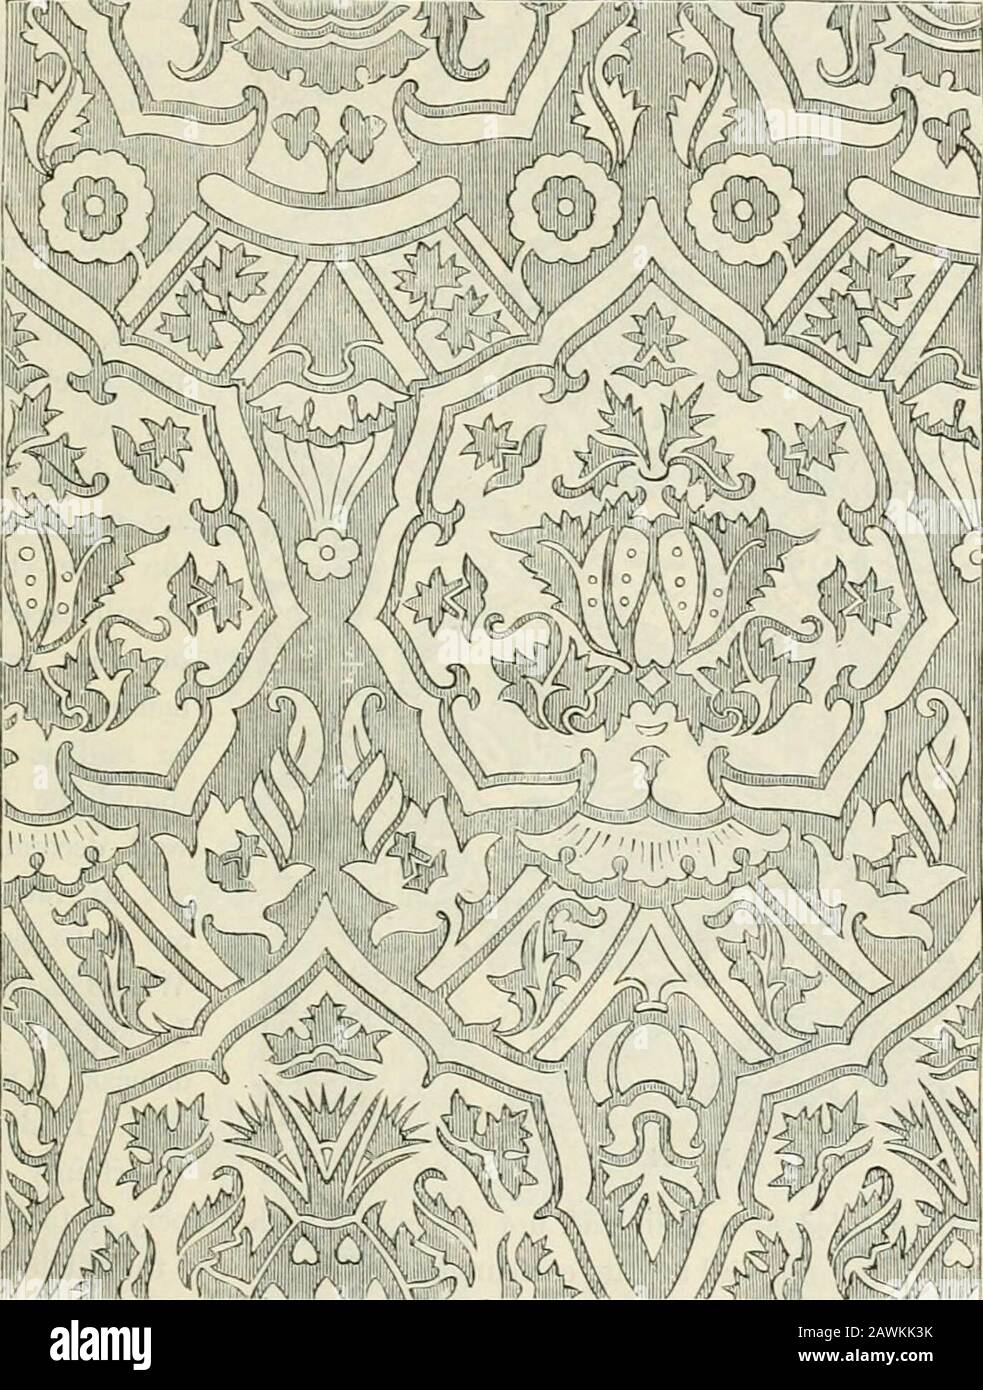 Principles of decorative design . Fig. 92. OliXAirEXTATTOX 01 IABlilCS SEEN IX IOT.DS. 11.3 3Id. If curves are tender and graceful, they become commonplace on a wavedor folded ground. 4th. The size of the pattern should be considered in relation to the size of thefolds of the material.. Fig. 93. In Germany a kind of ornament is applied to rich stiff fabrics which is almostpeculiar to the country. This ornament is rich, bold, hard or stiff in its lines, andin every way adapted for the decoration of a costly fabric which falls in large folds,the folds changing the hard and stiff lines into grace Stock Photo